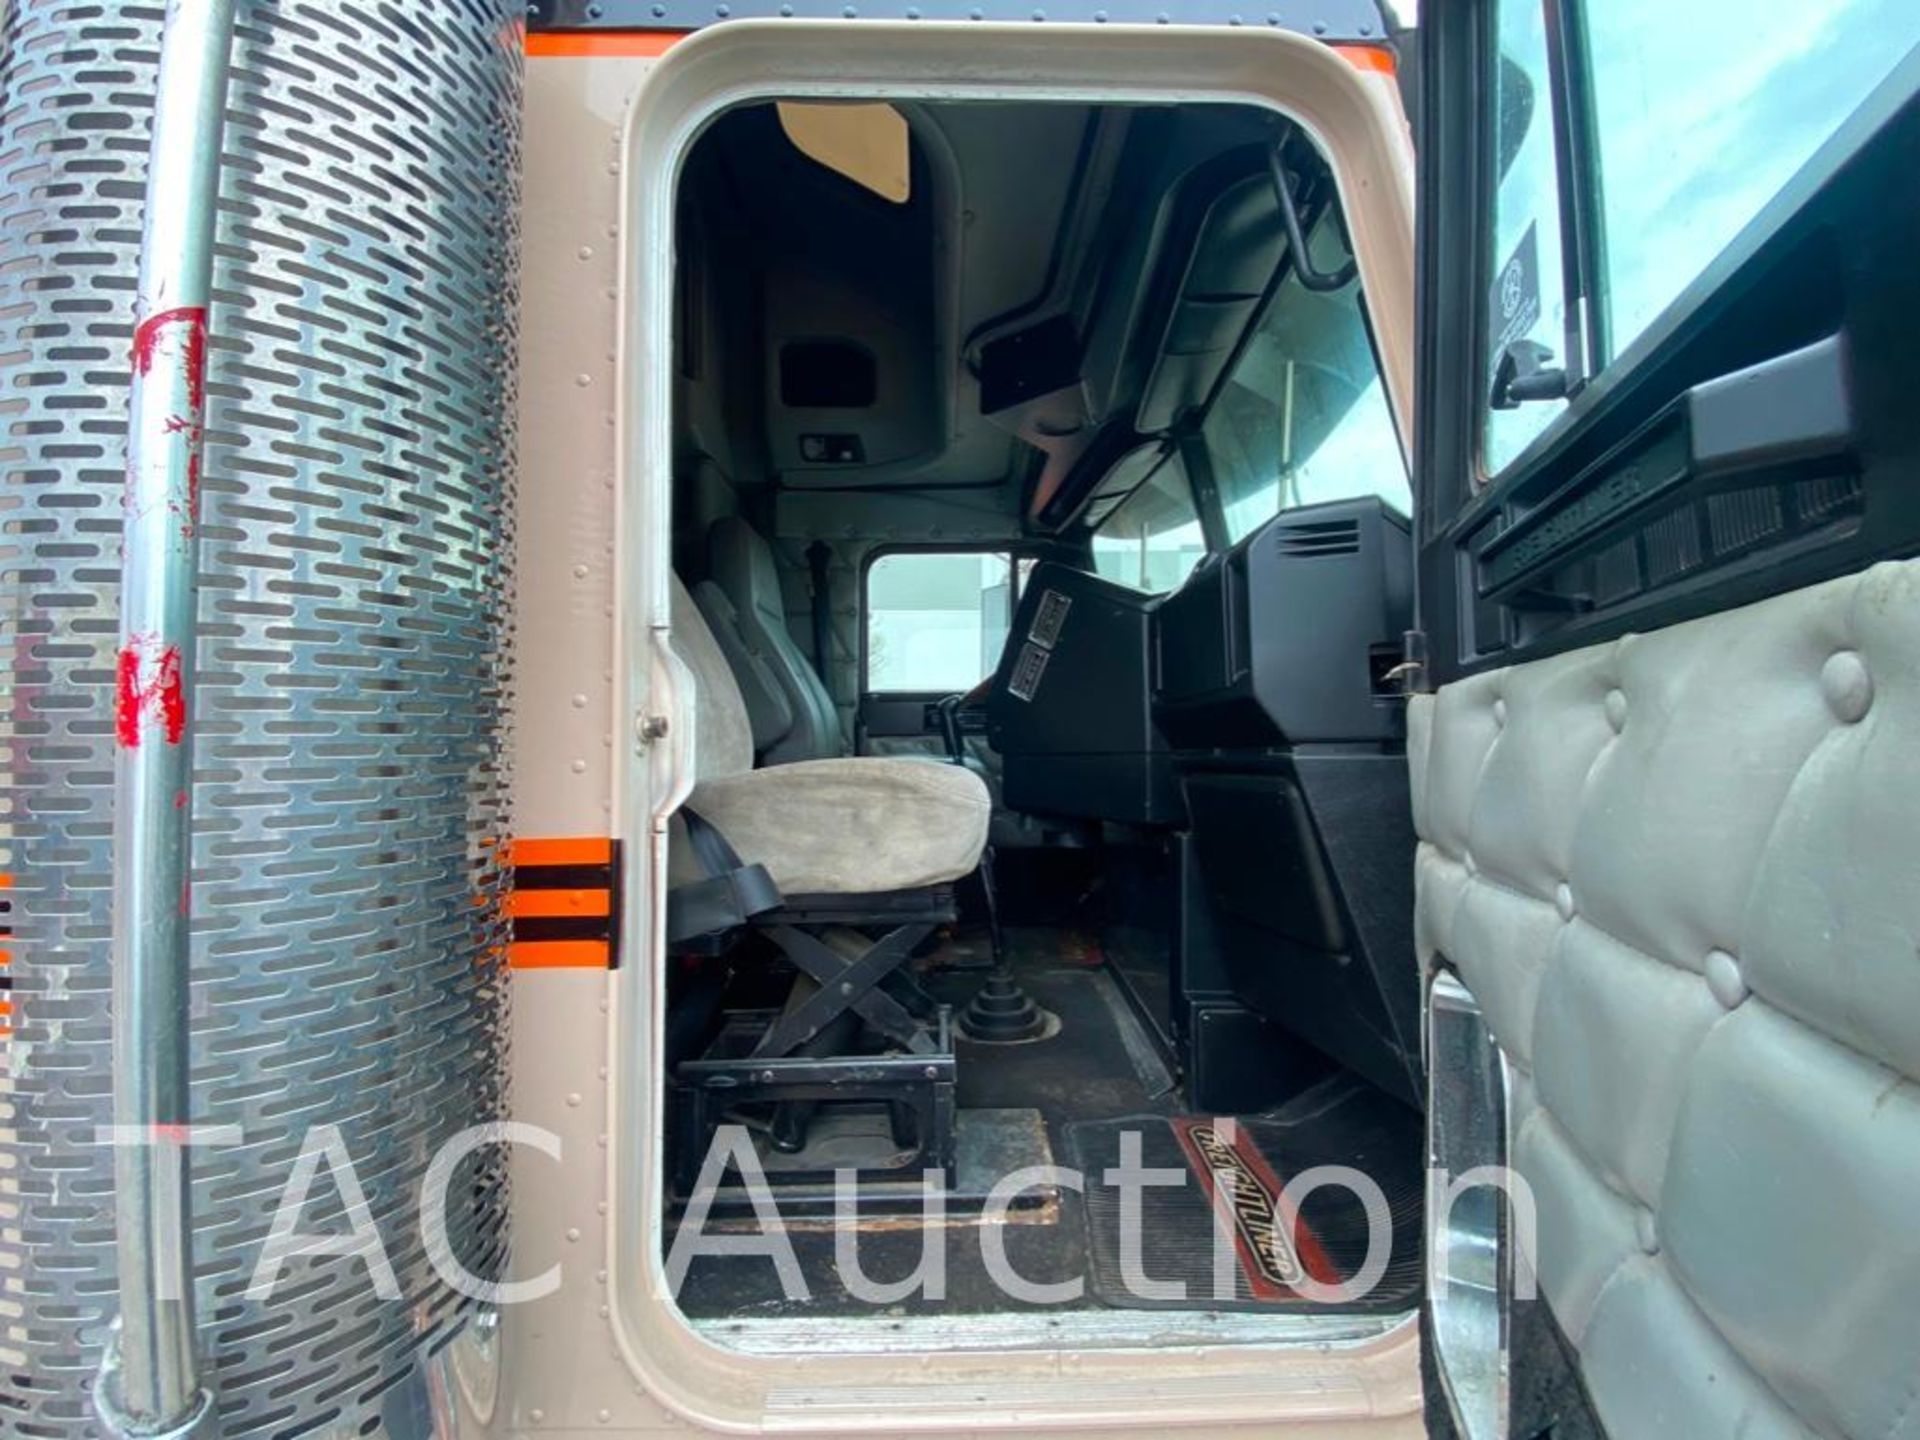 2002 Freightliner Classic XL Sleeper Truck - Image 25 of 132